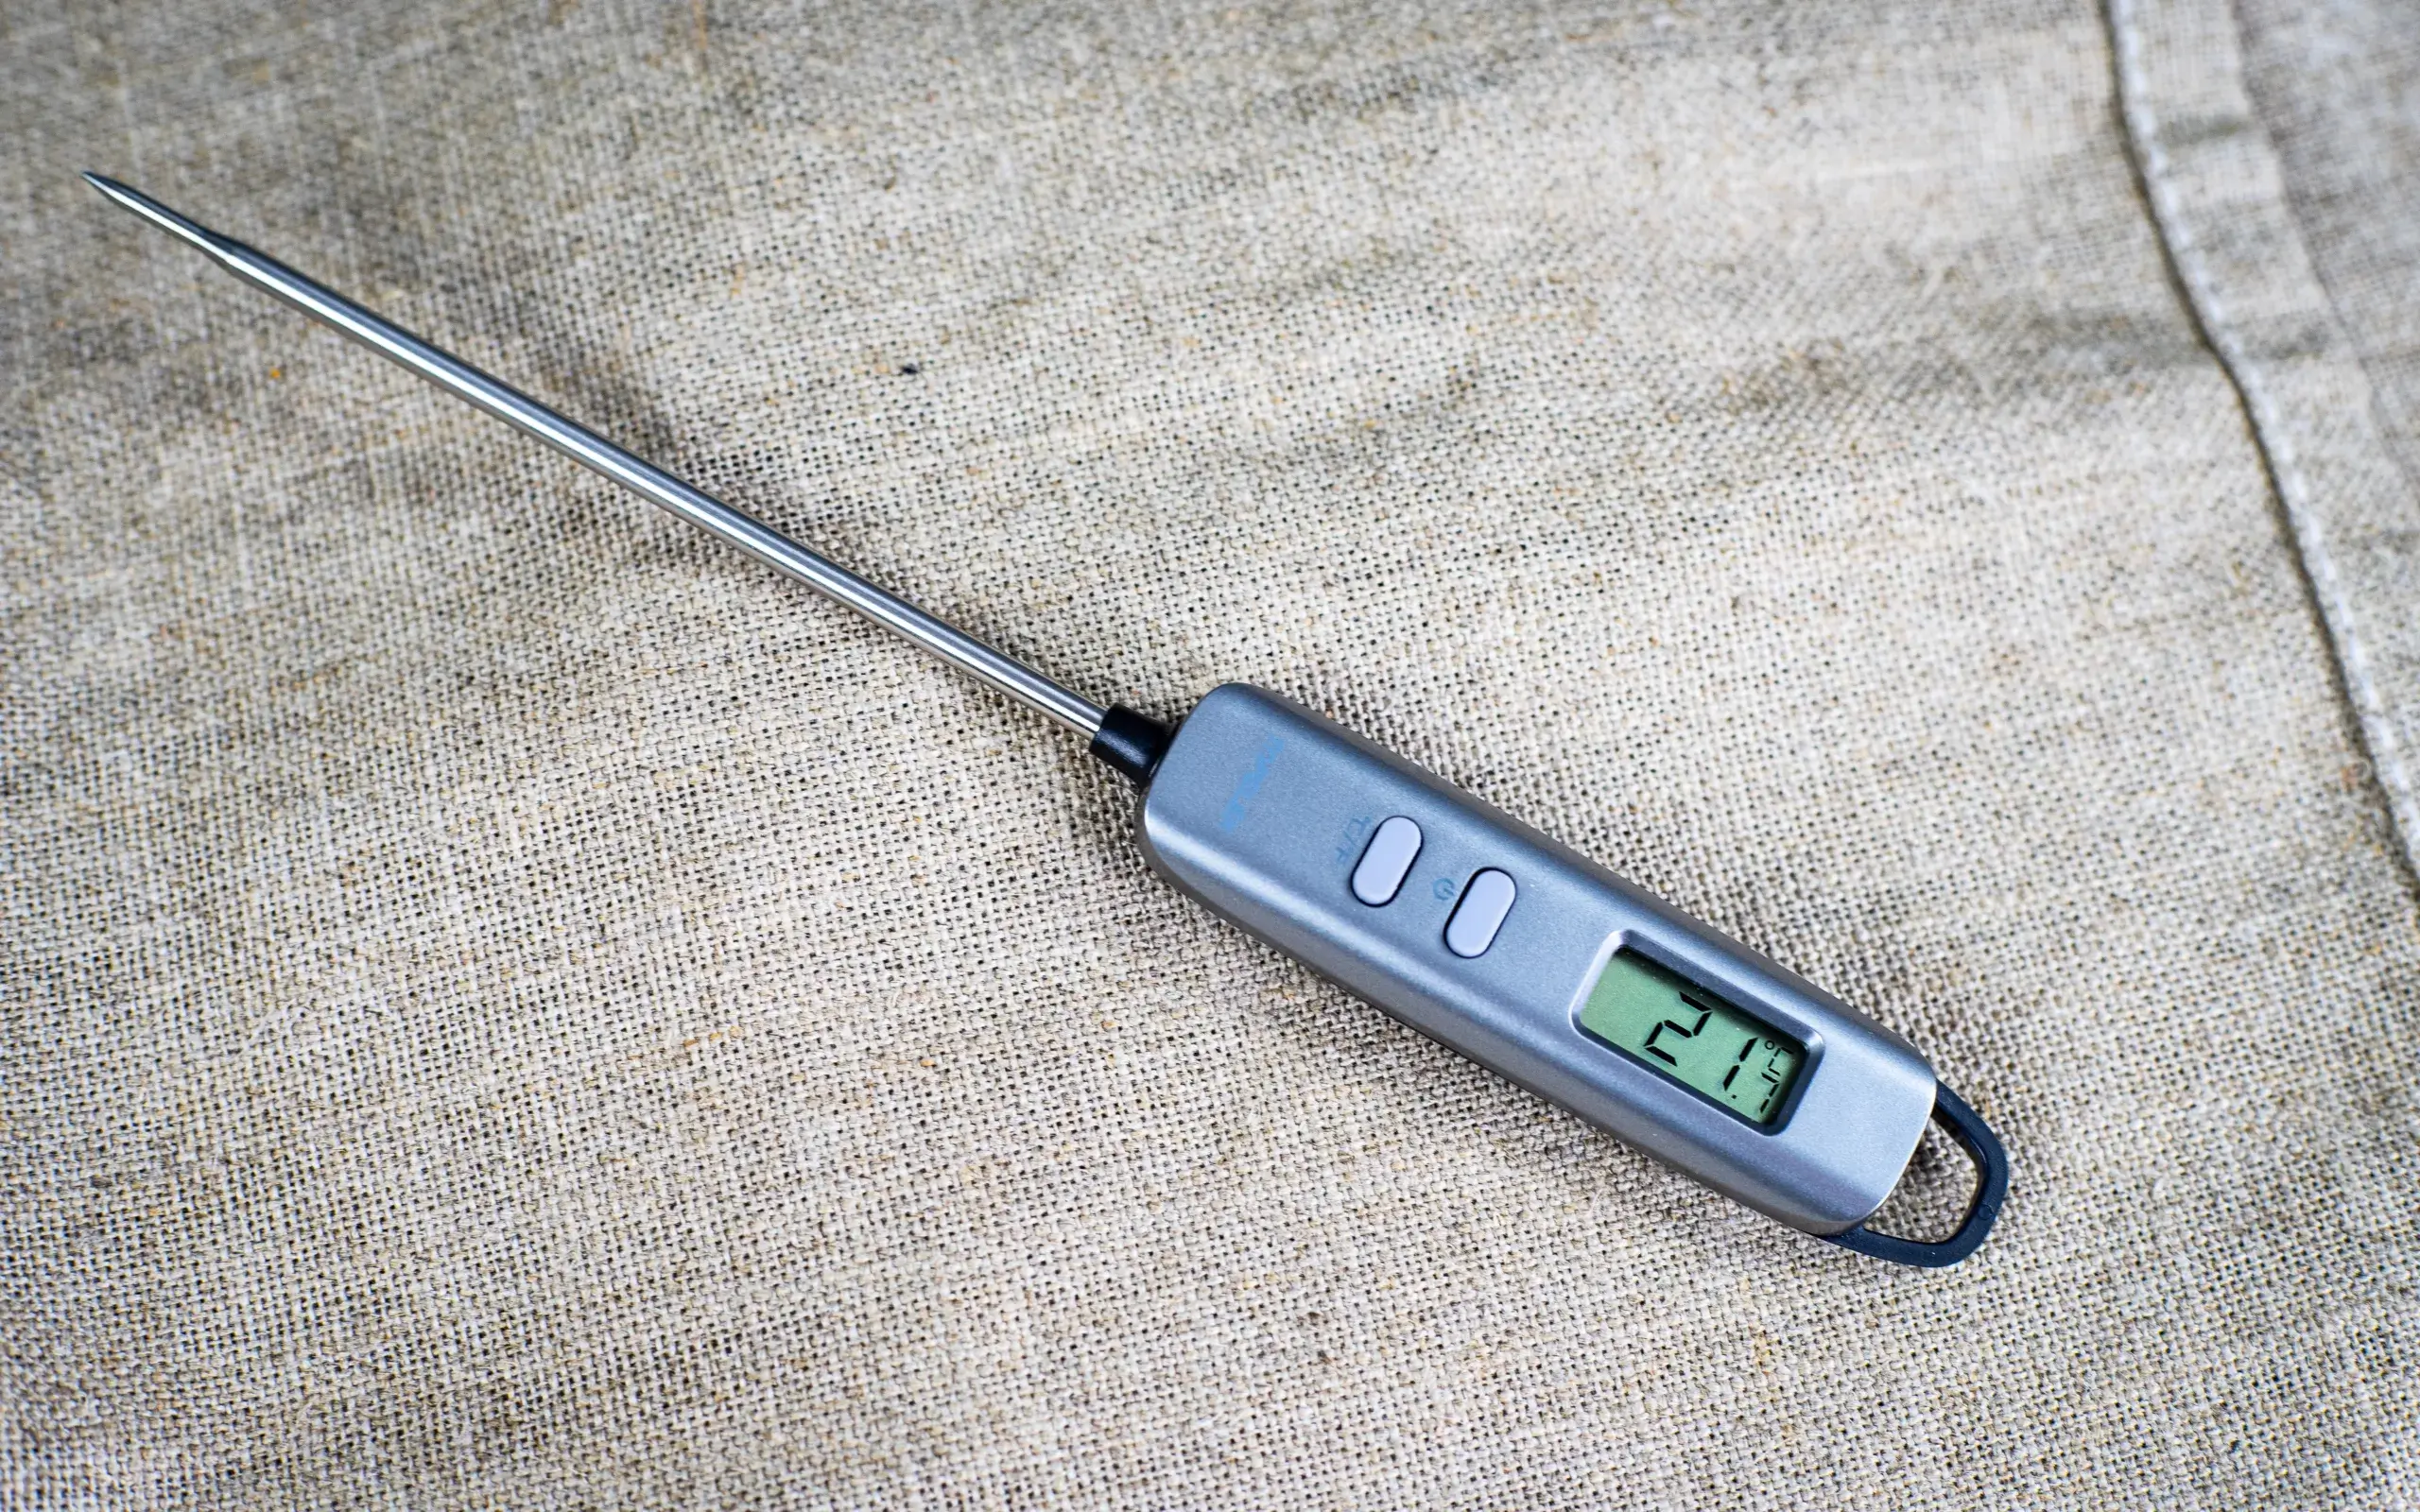 Instant Read Thermometers: The Key to Perfect Baking Ingredients